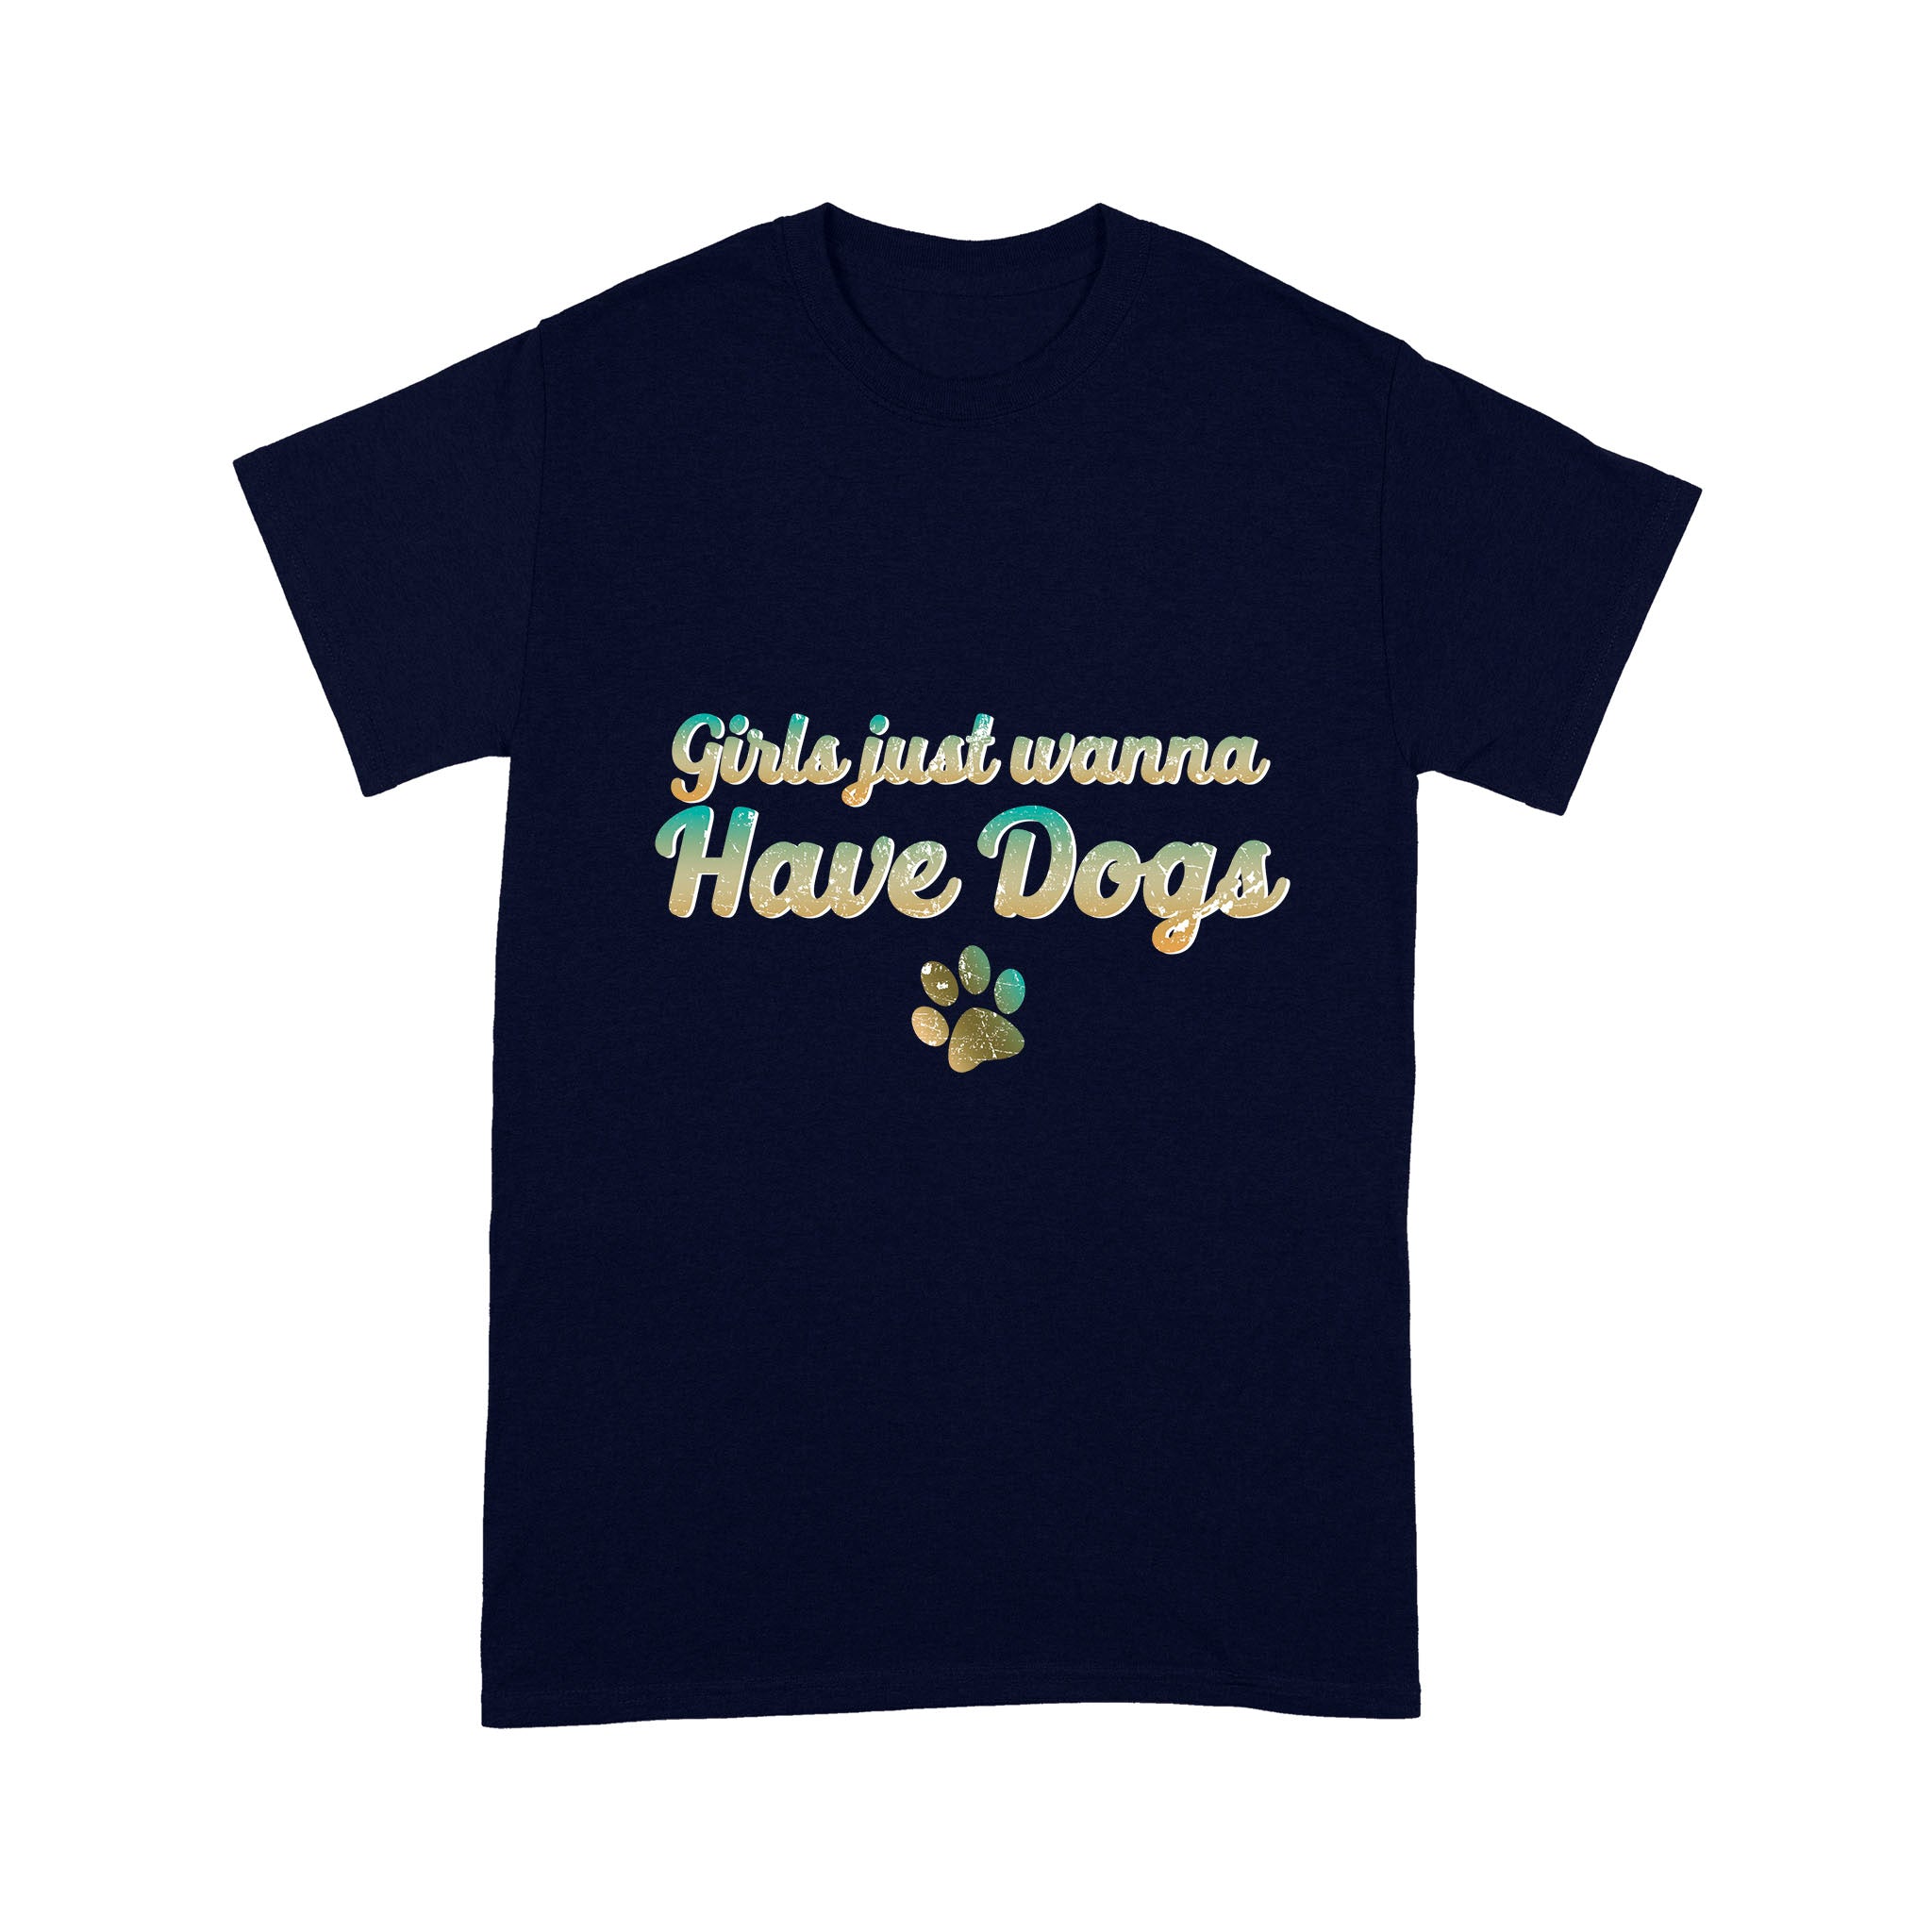 Retro Dog Lover Tee -  Girls Just Wanna Have Dogs T-shirt - Dog Lover Gift for Dog Mom, Dog Dad, Dog Owner - Dog Pawprint T-shirt - JTSD99 A02M05